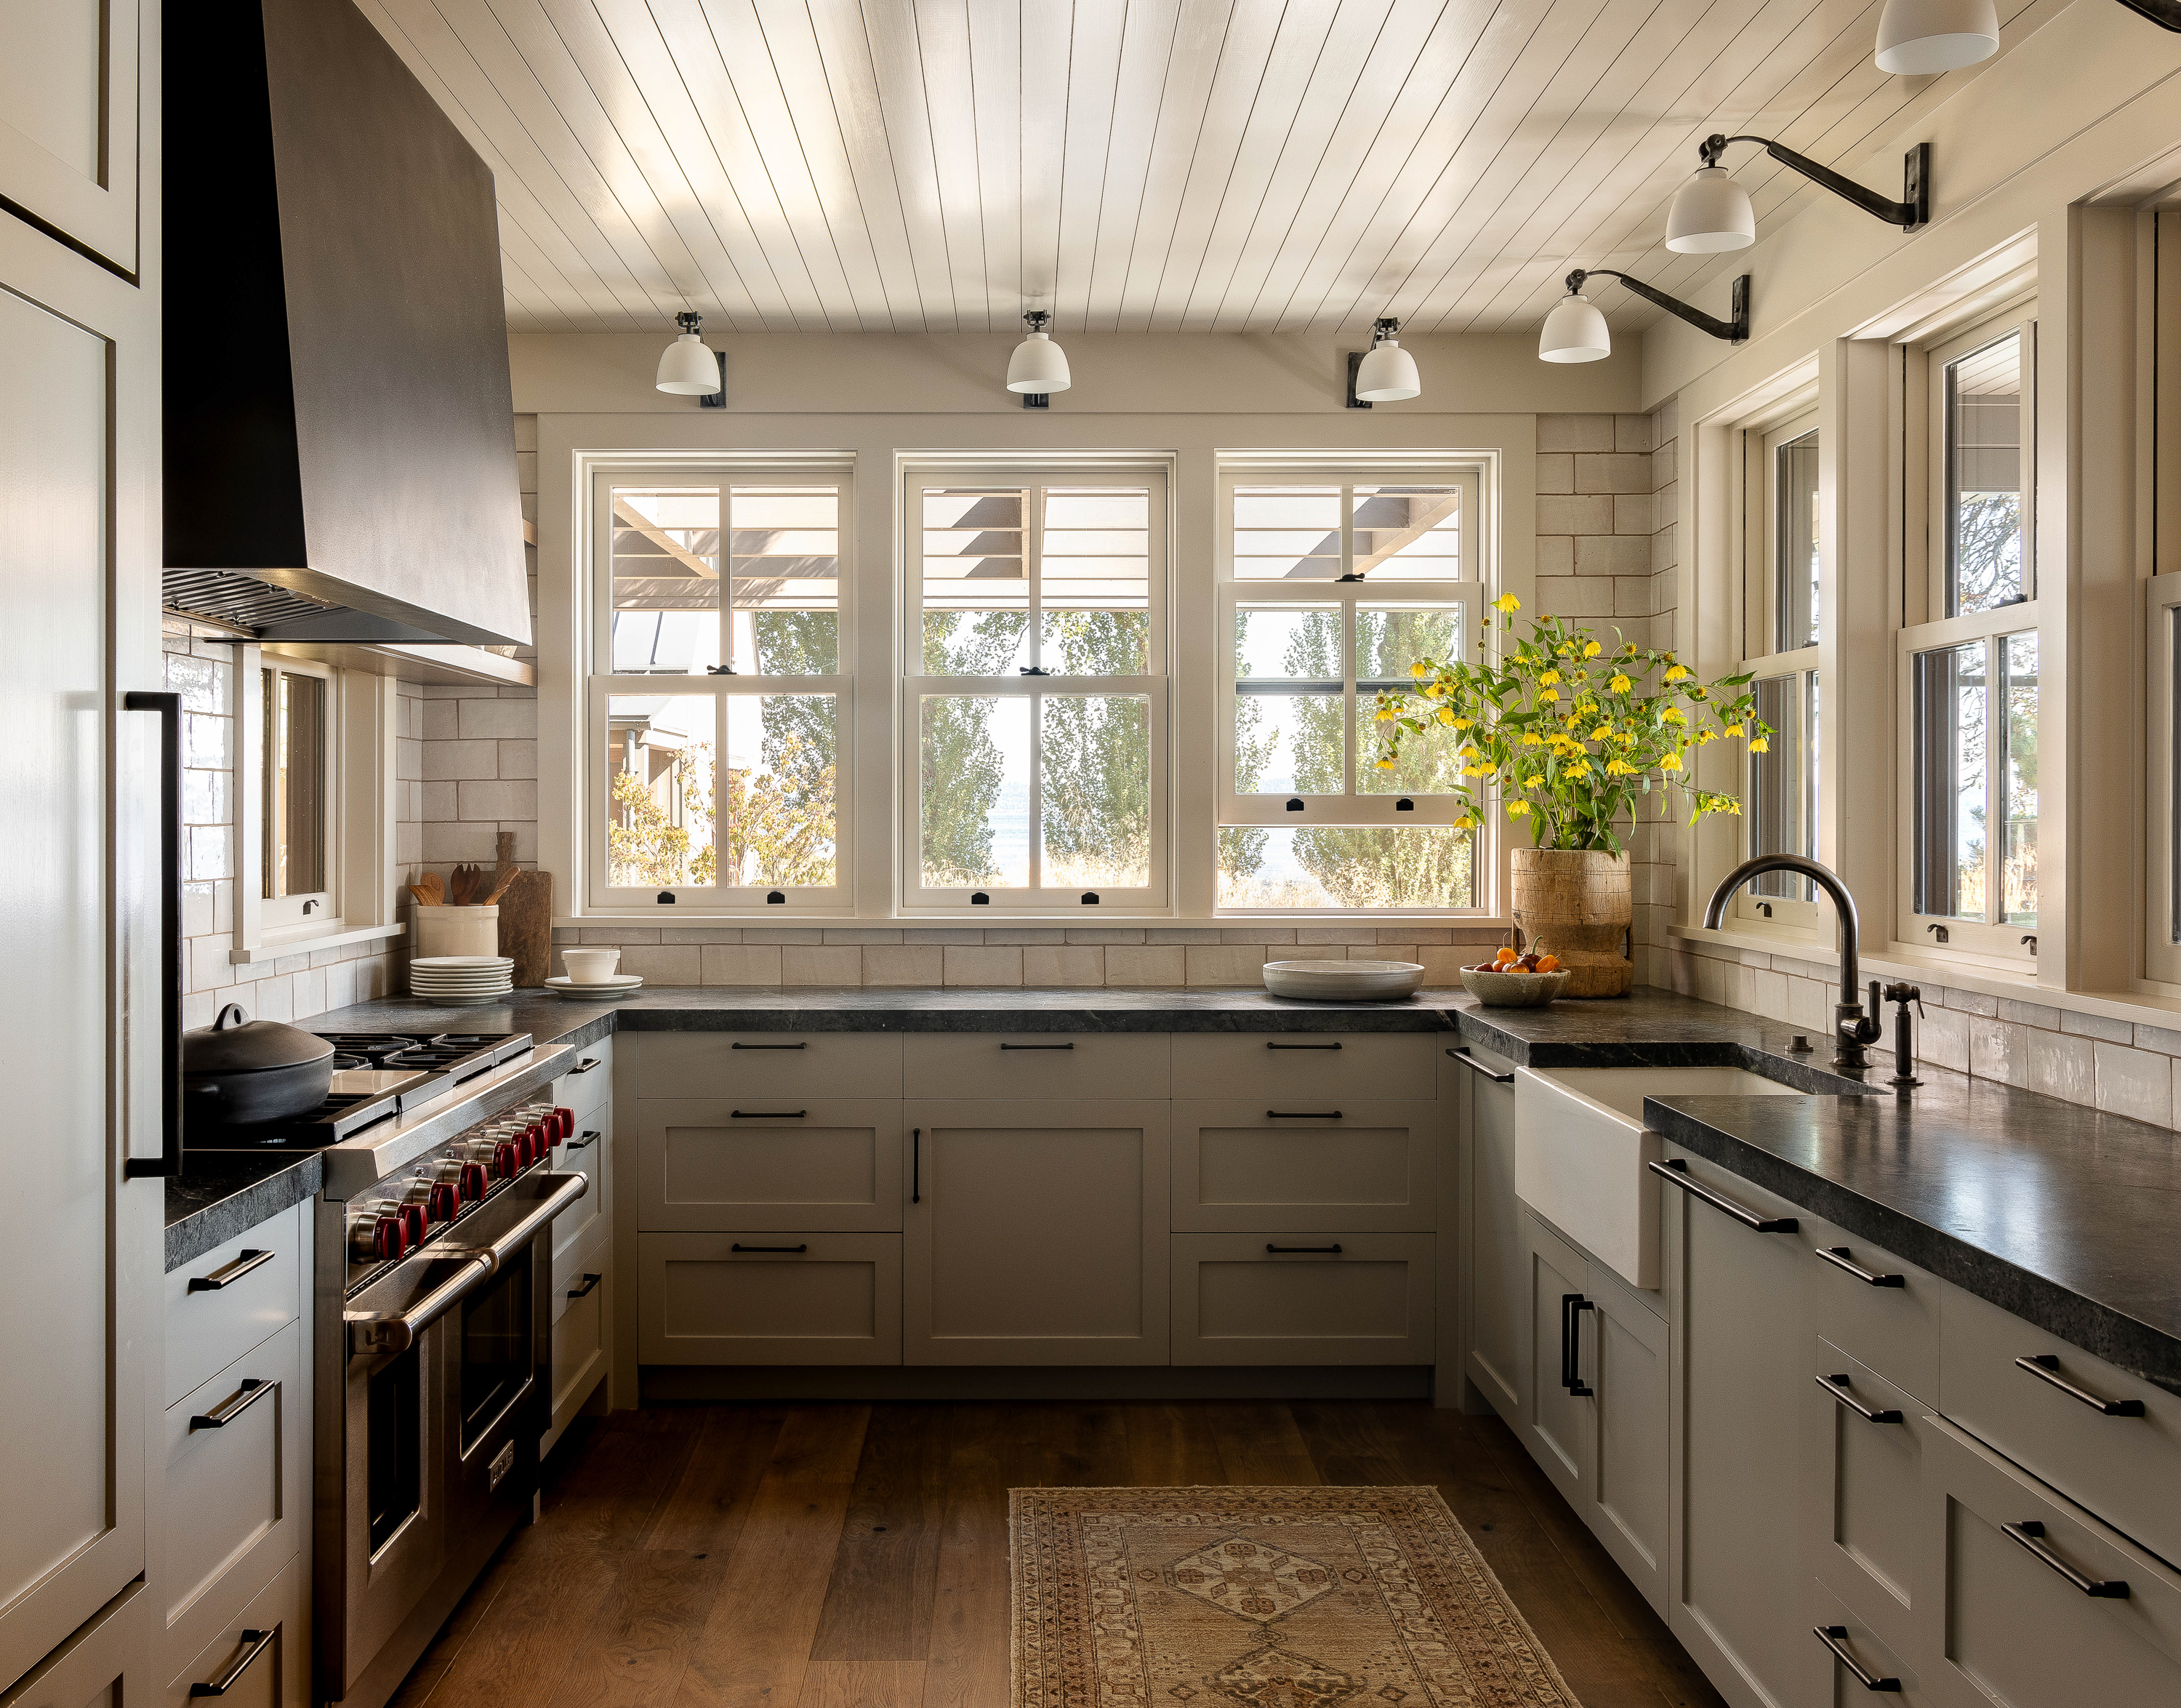 The kitchen features soapstone countertops, brass and bronze fittings, and double-hung windows that offer easy cross ventilation, creating a perfect blend of beach house and farm kitchen vibes.